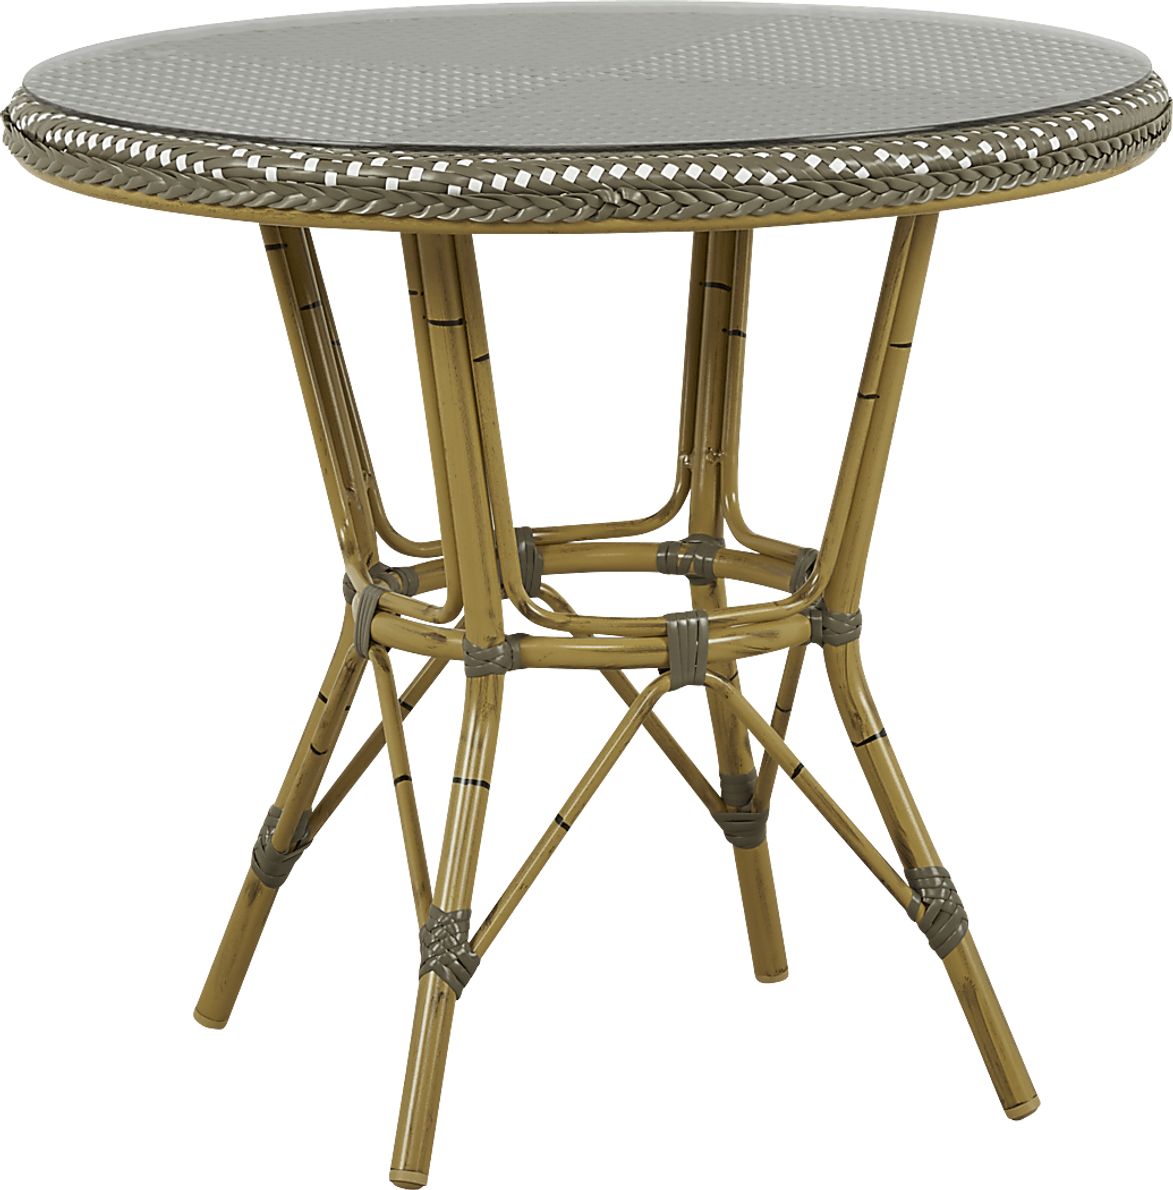 Juliette Gray 33 in. Round Outdoor Dining Table